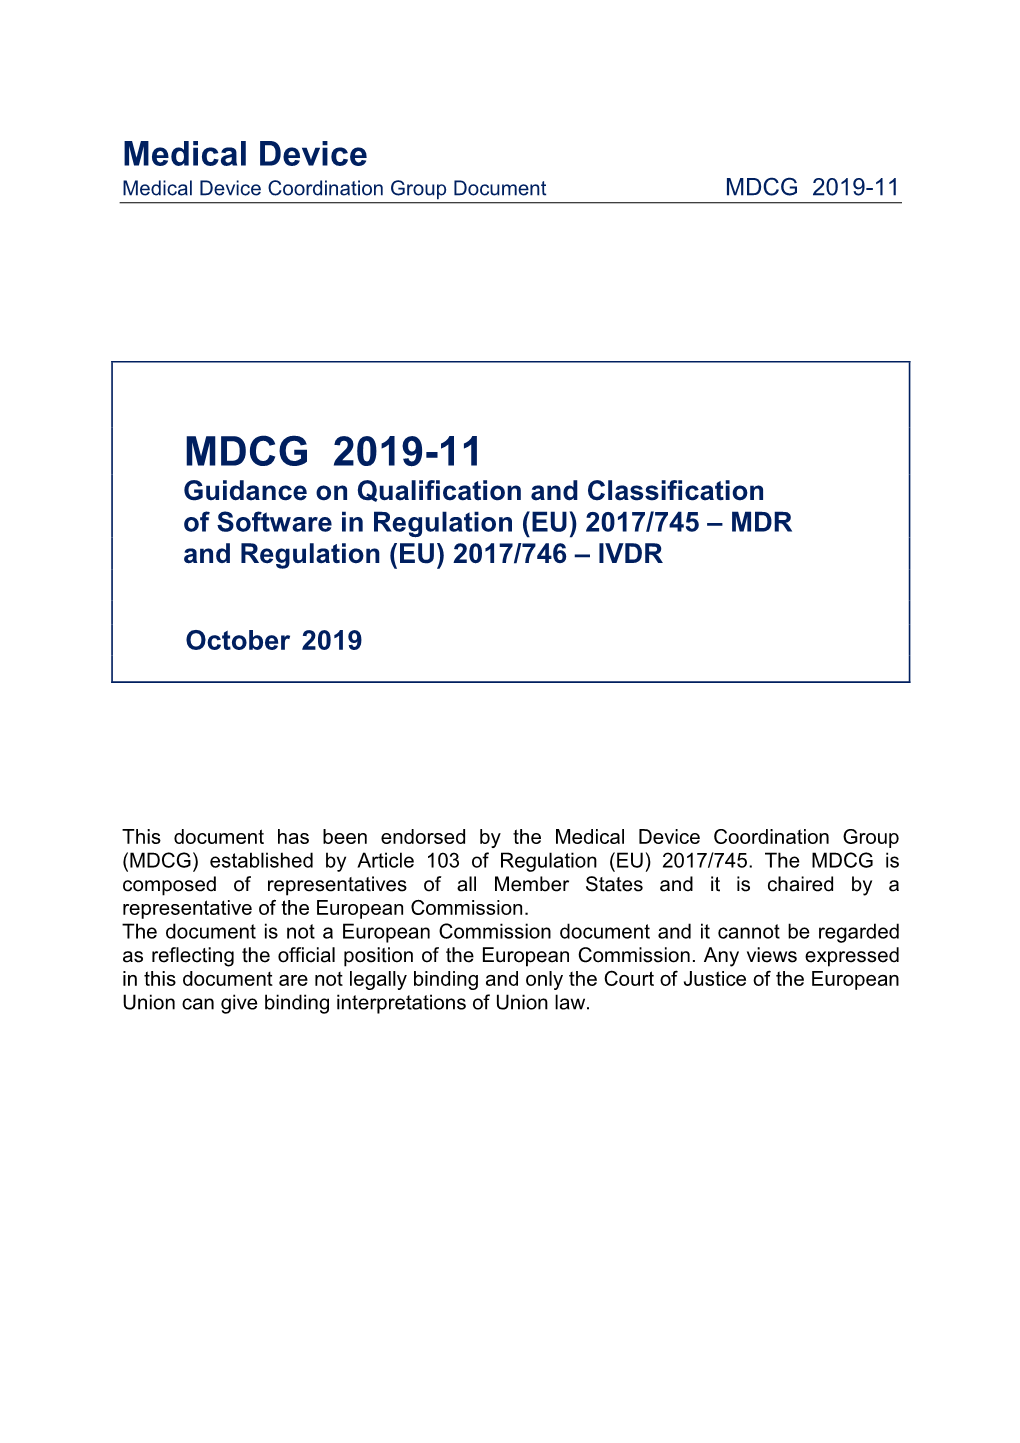 MDCG 2019-11 Guidance on Qualification and Classification of Software in Regulation (EU) 2017/745 – MDR and Regulation (EU) 2017/746 – IVDR